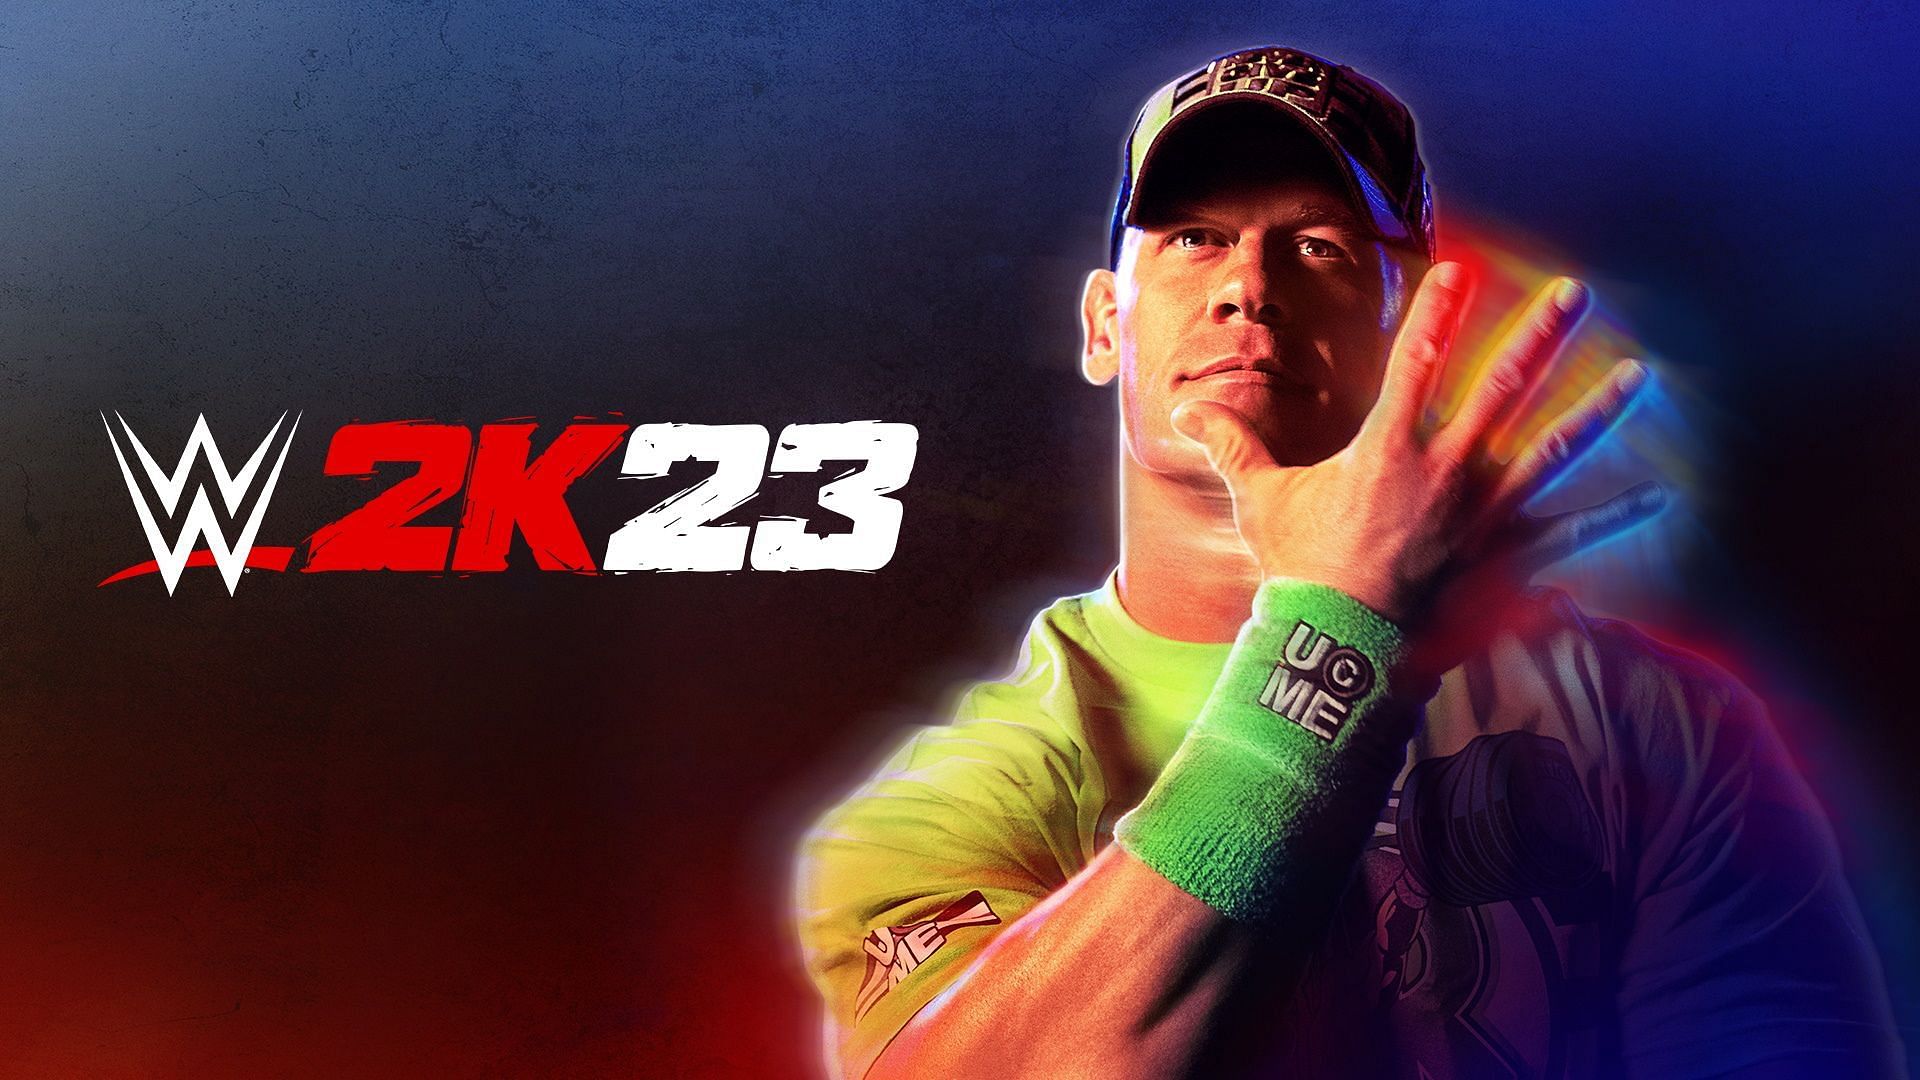 John Cena is the cover star of WWE 2K23